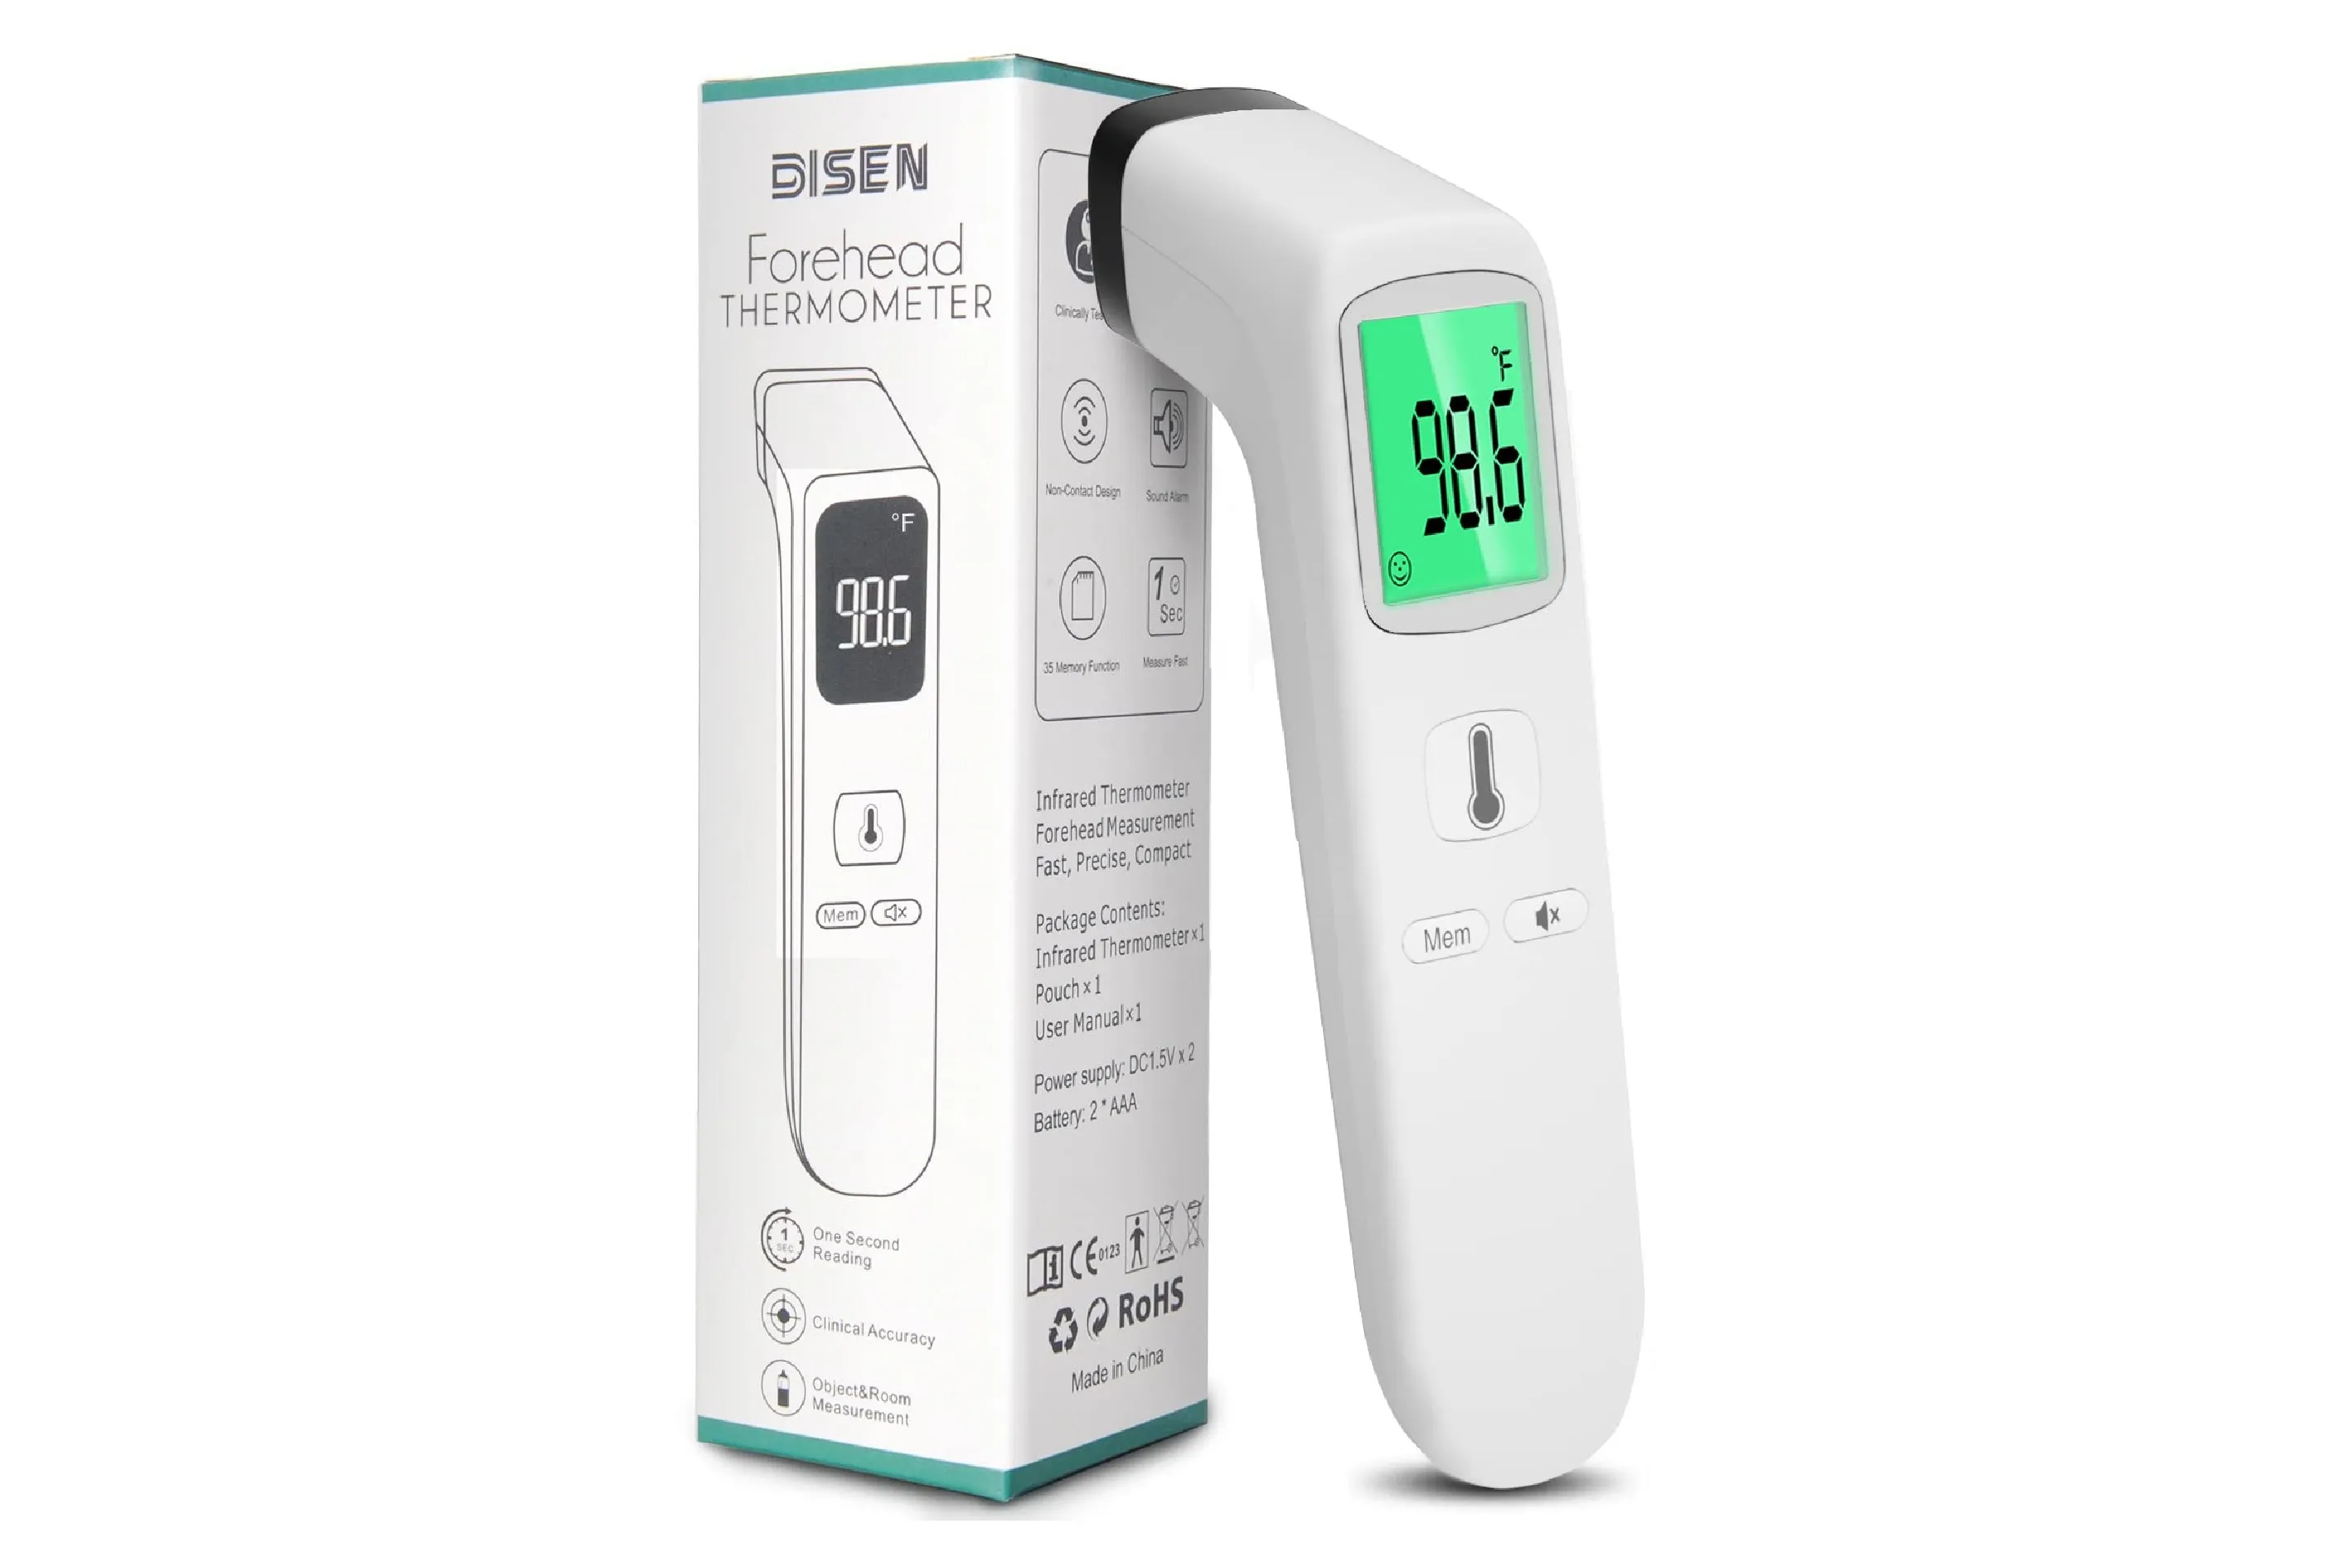 https://img.money.com/2023/09/shopping-disen-non-contact-forehead-thermometer.jpg